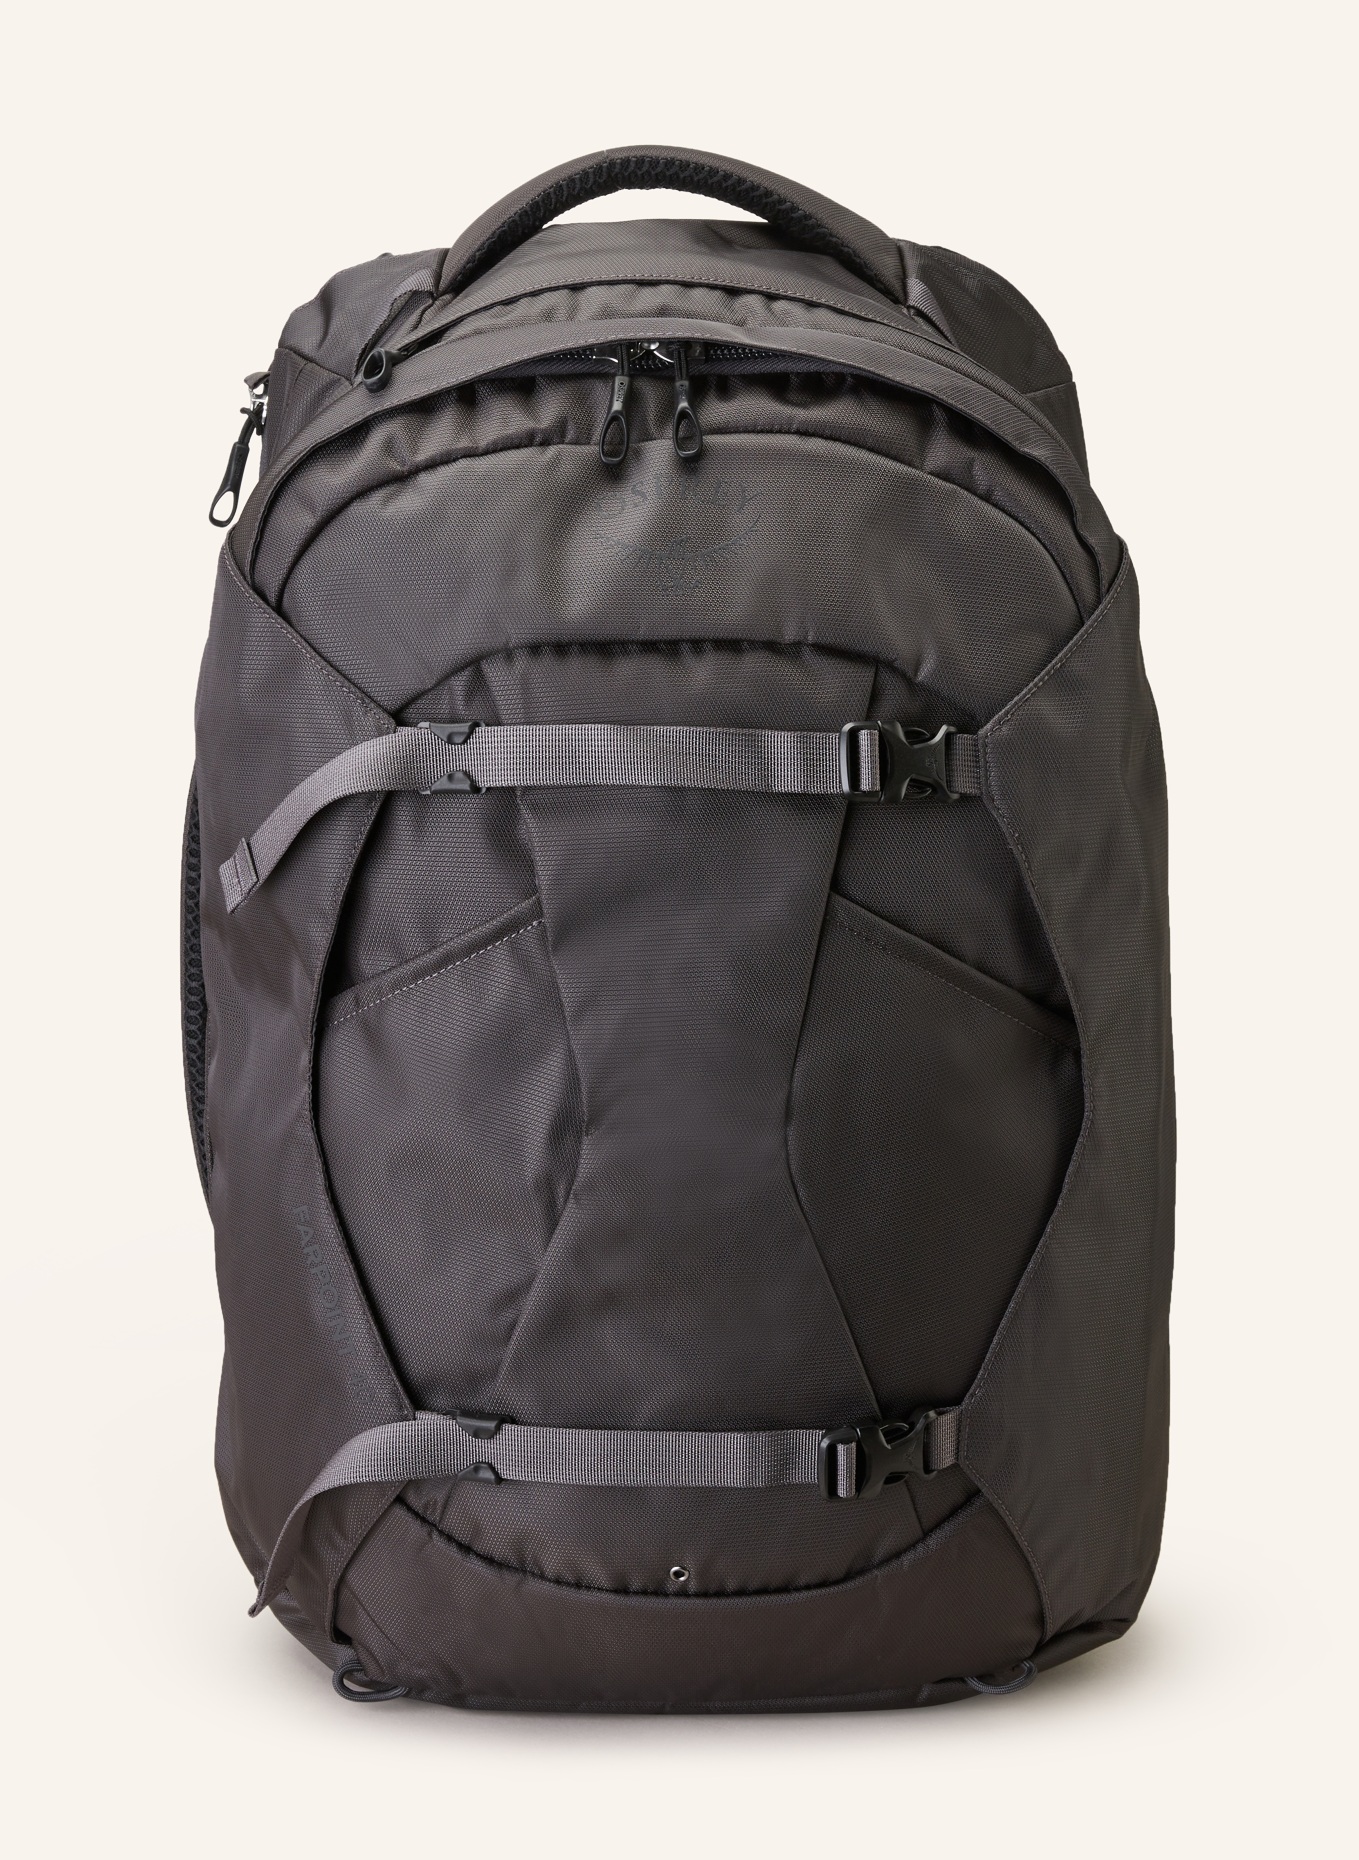 OSPREY Backpack FARPOINT™ 40 l with laptop compartment, Color: GRAY (Image 1)